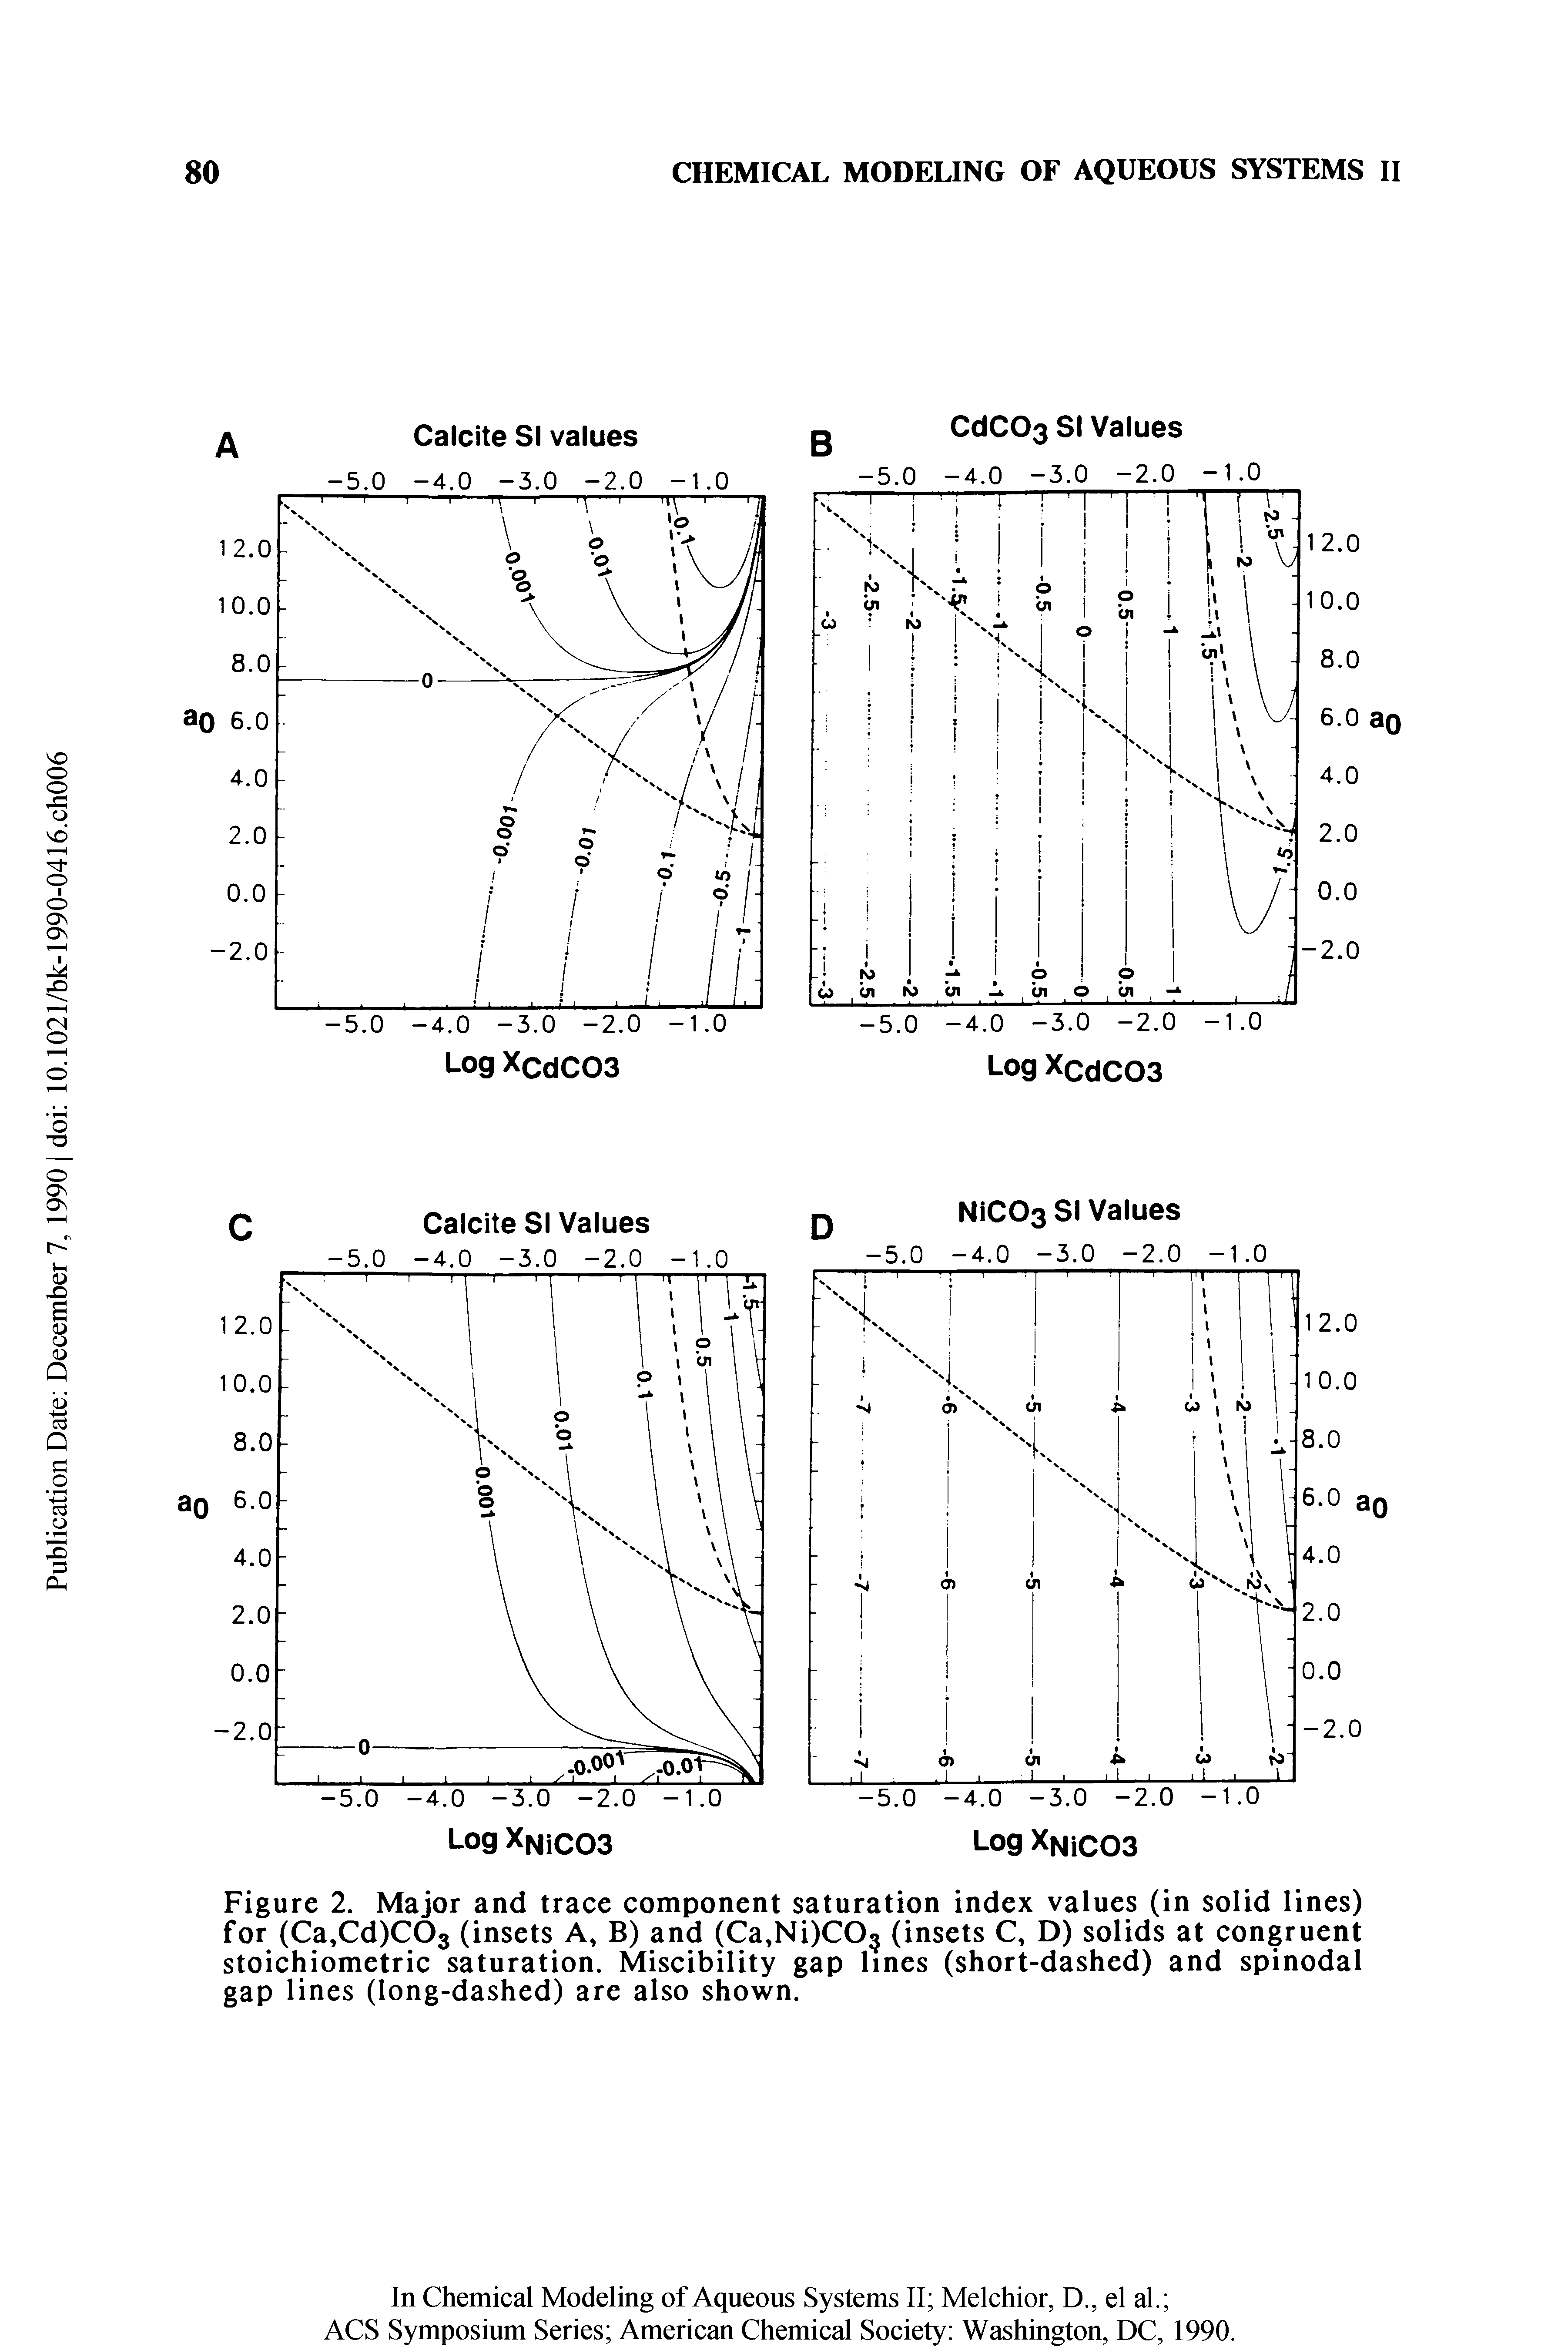 Figure 2. Major and trace component saturation index values (in solid lines) for (Ca,Cd)C03 (insets A, B) and (Ca,Ni)C05 (insets C, D) solids at congruent stoichiometric saturation. Miscibility gap lines (short-dashed) and spinodal gap lines Oong-dashed) are also shown.